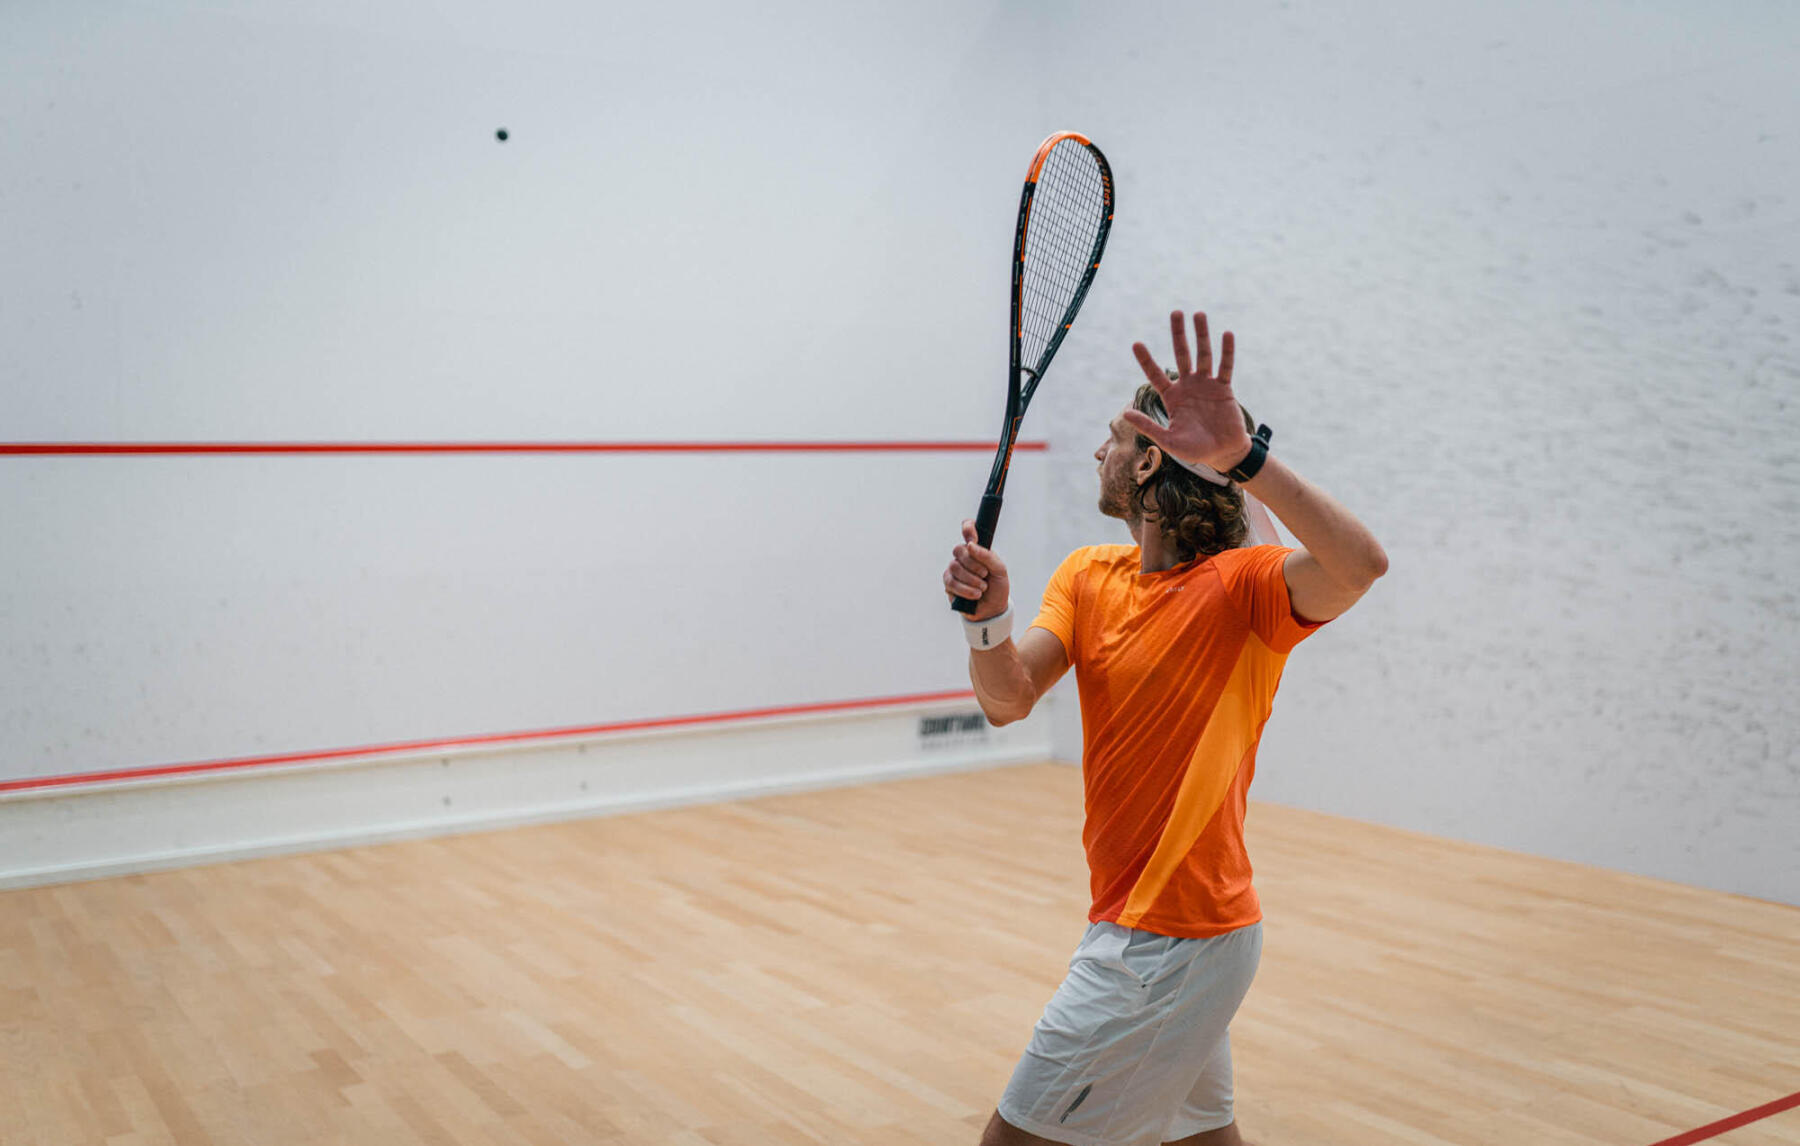 Discover squash, a sport mix of endurance and agility